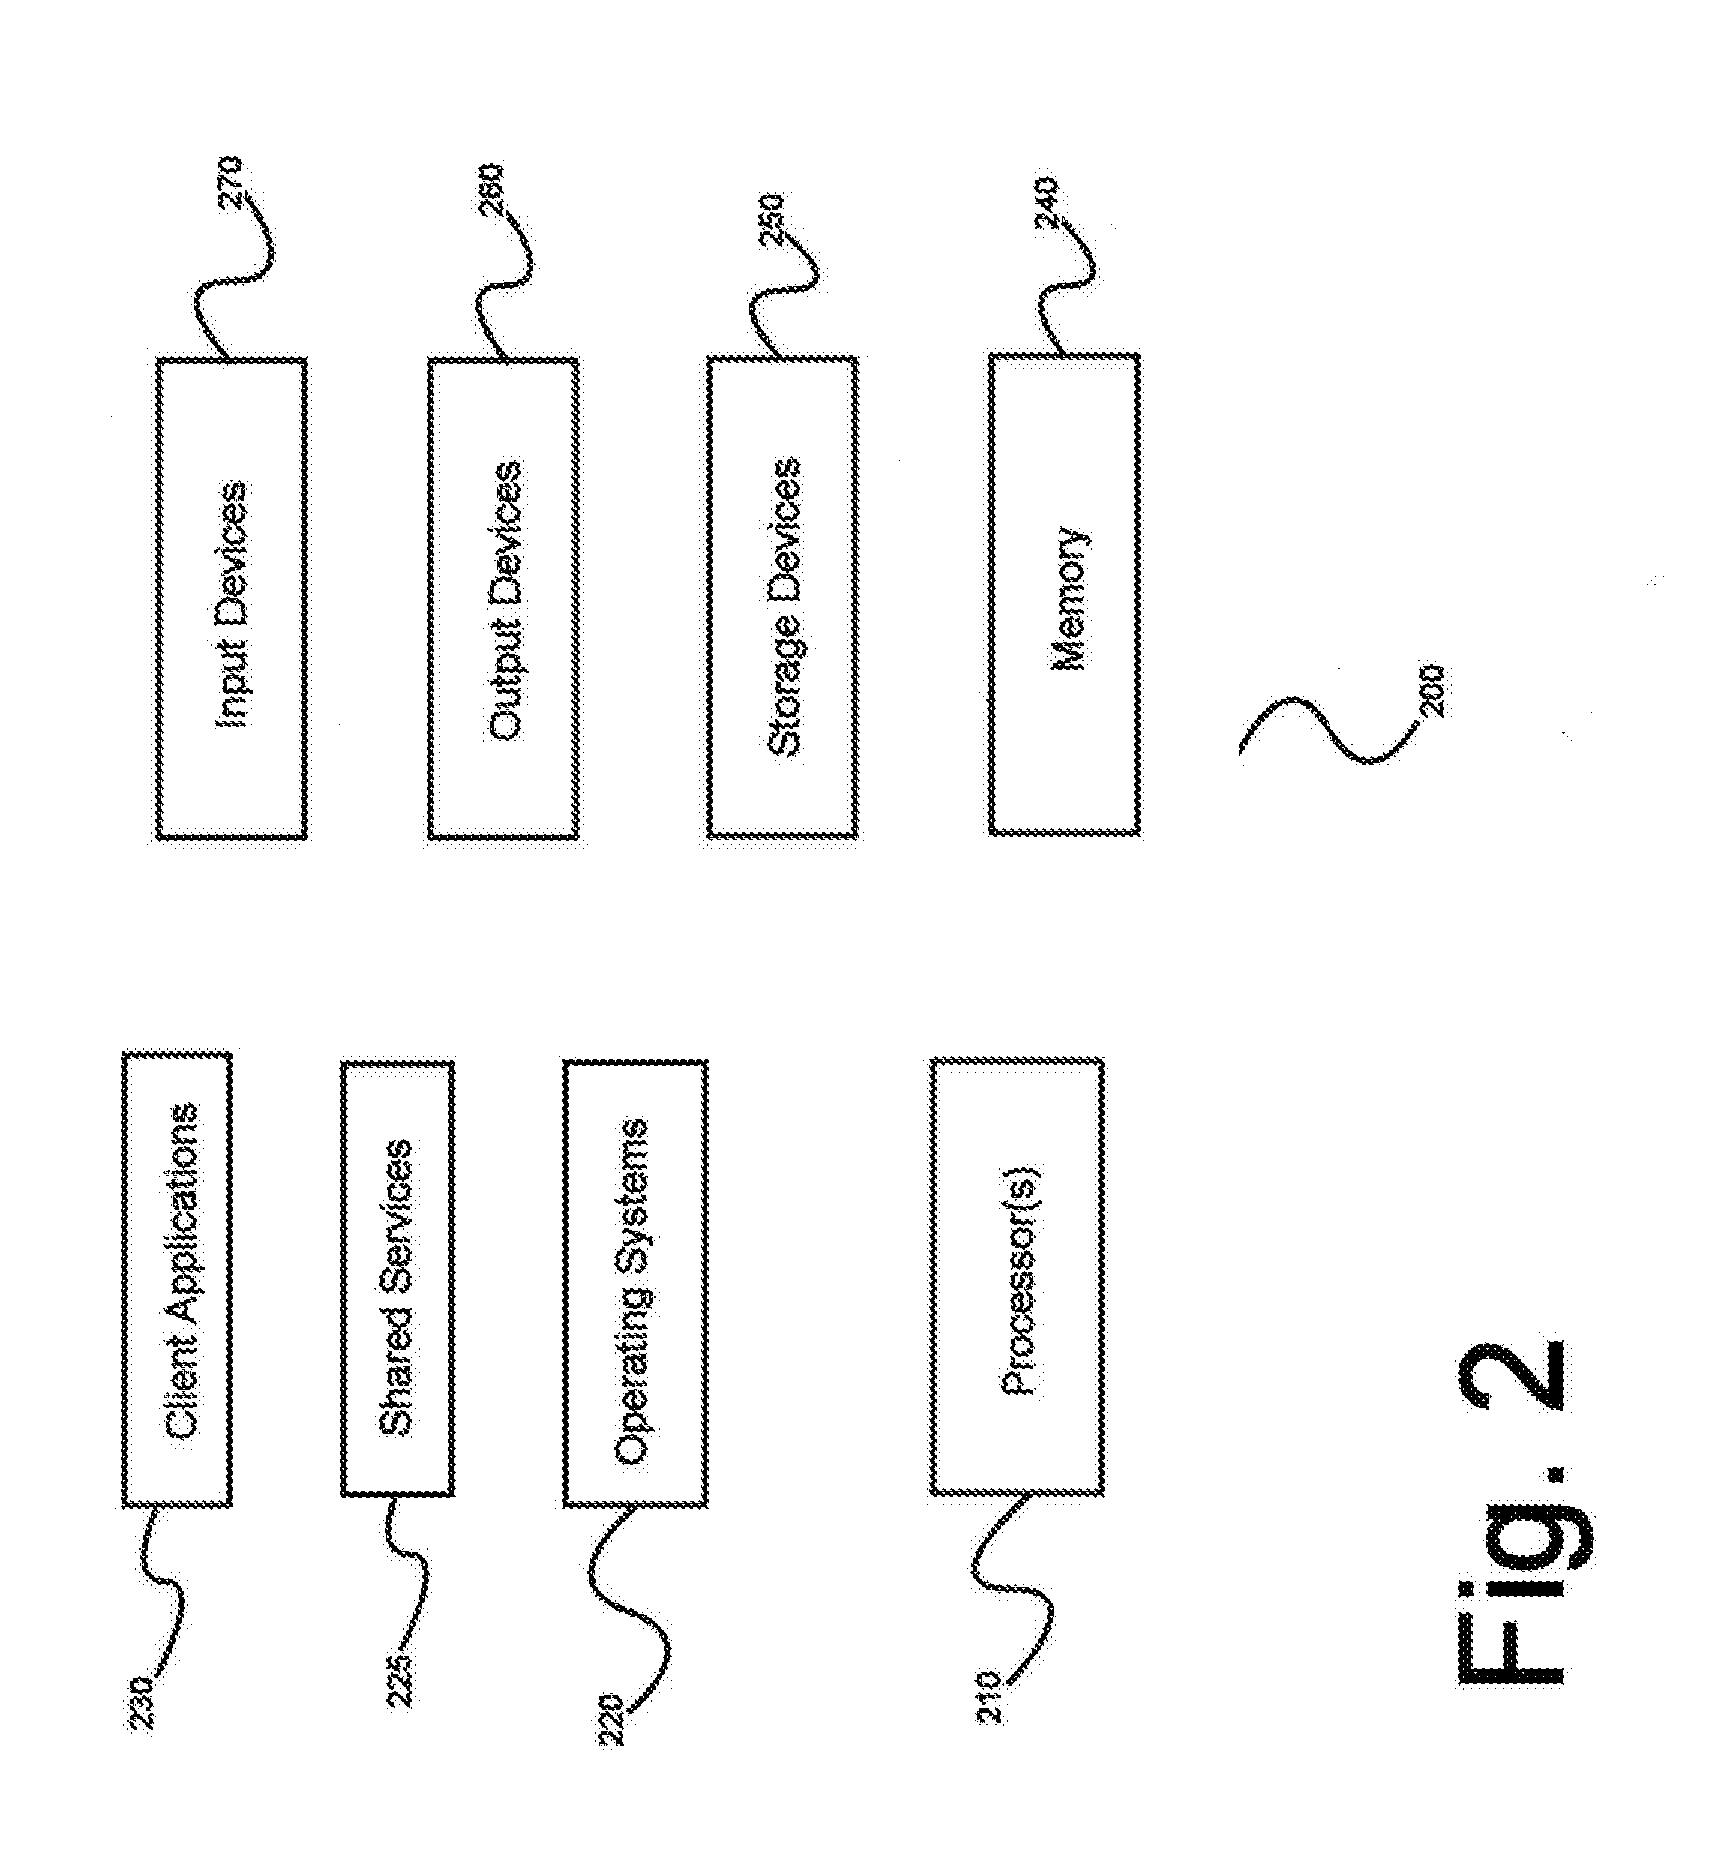 Multiple microphones for synchronized voice interaction